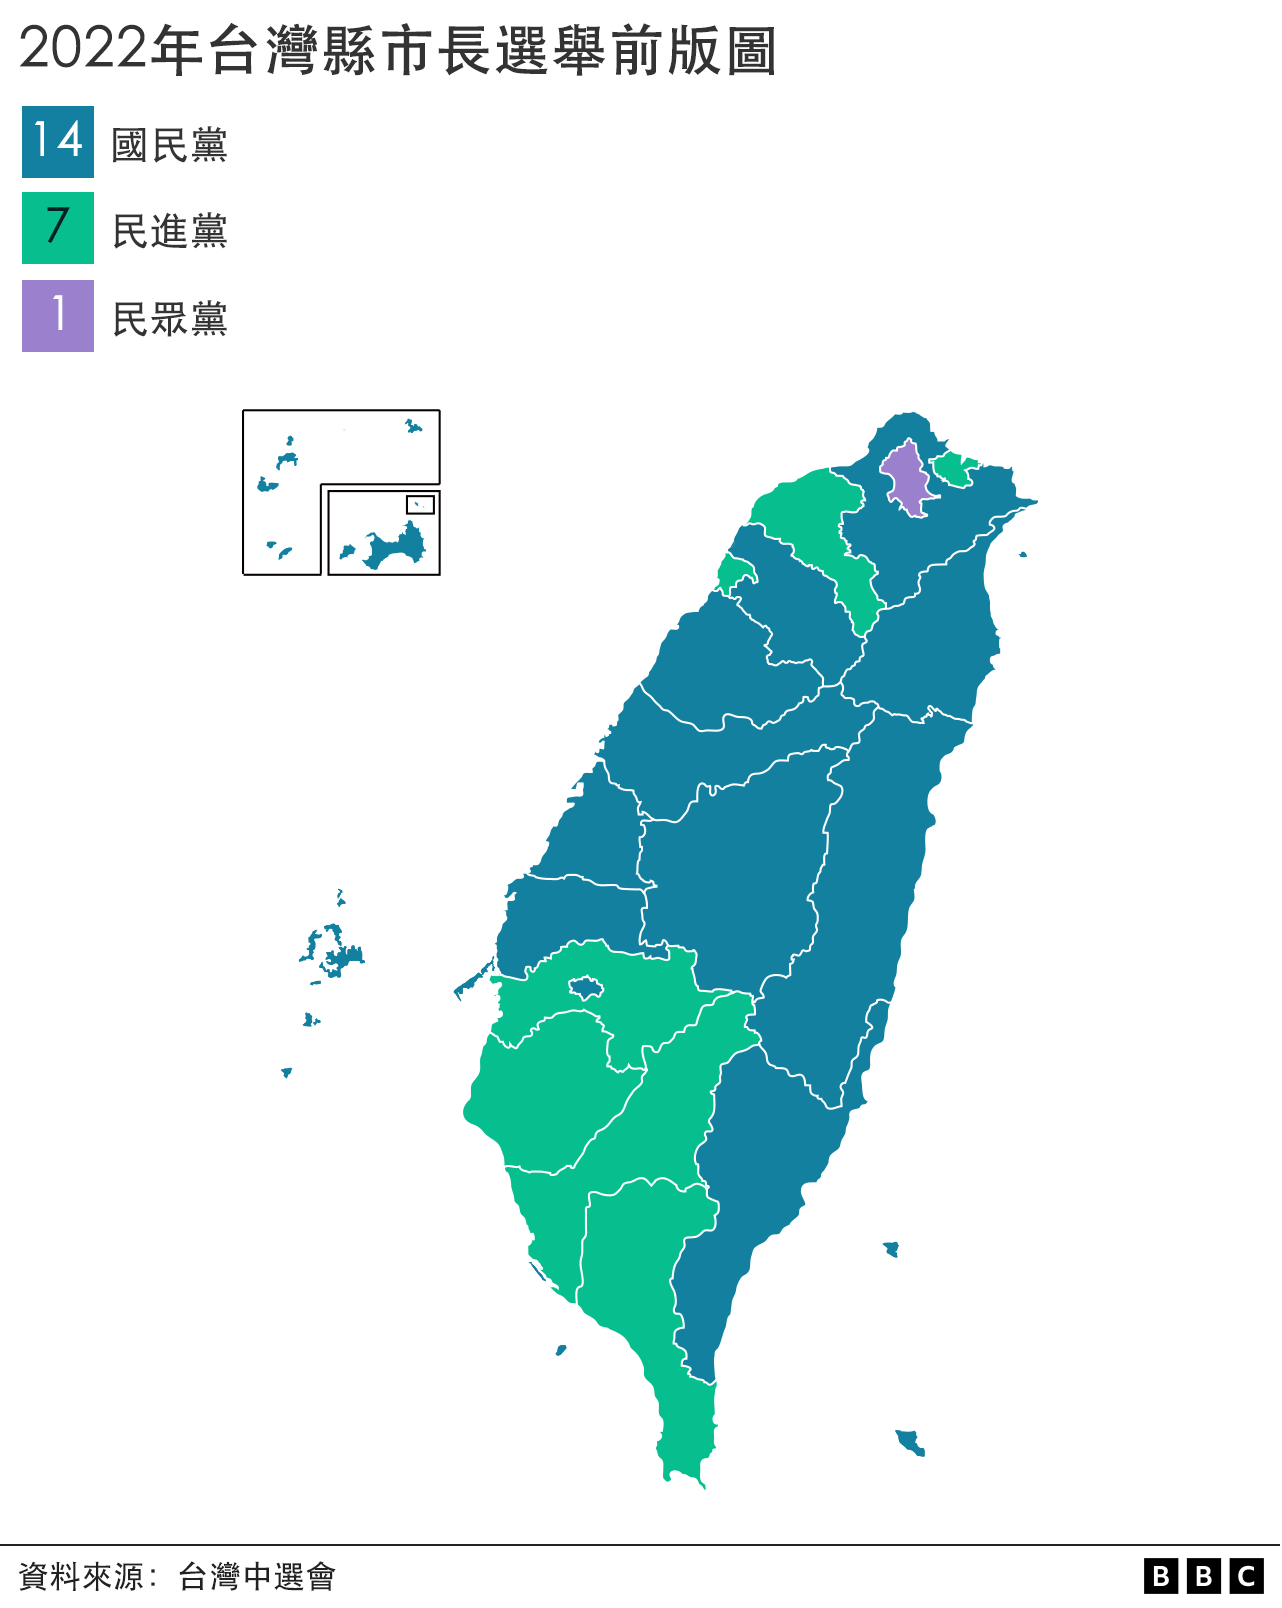 taiwan party map